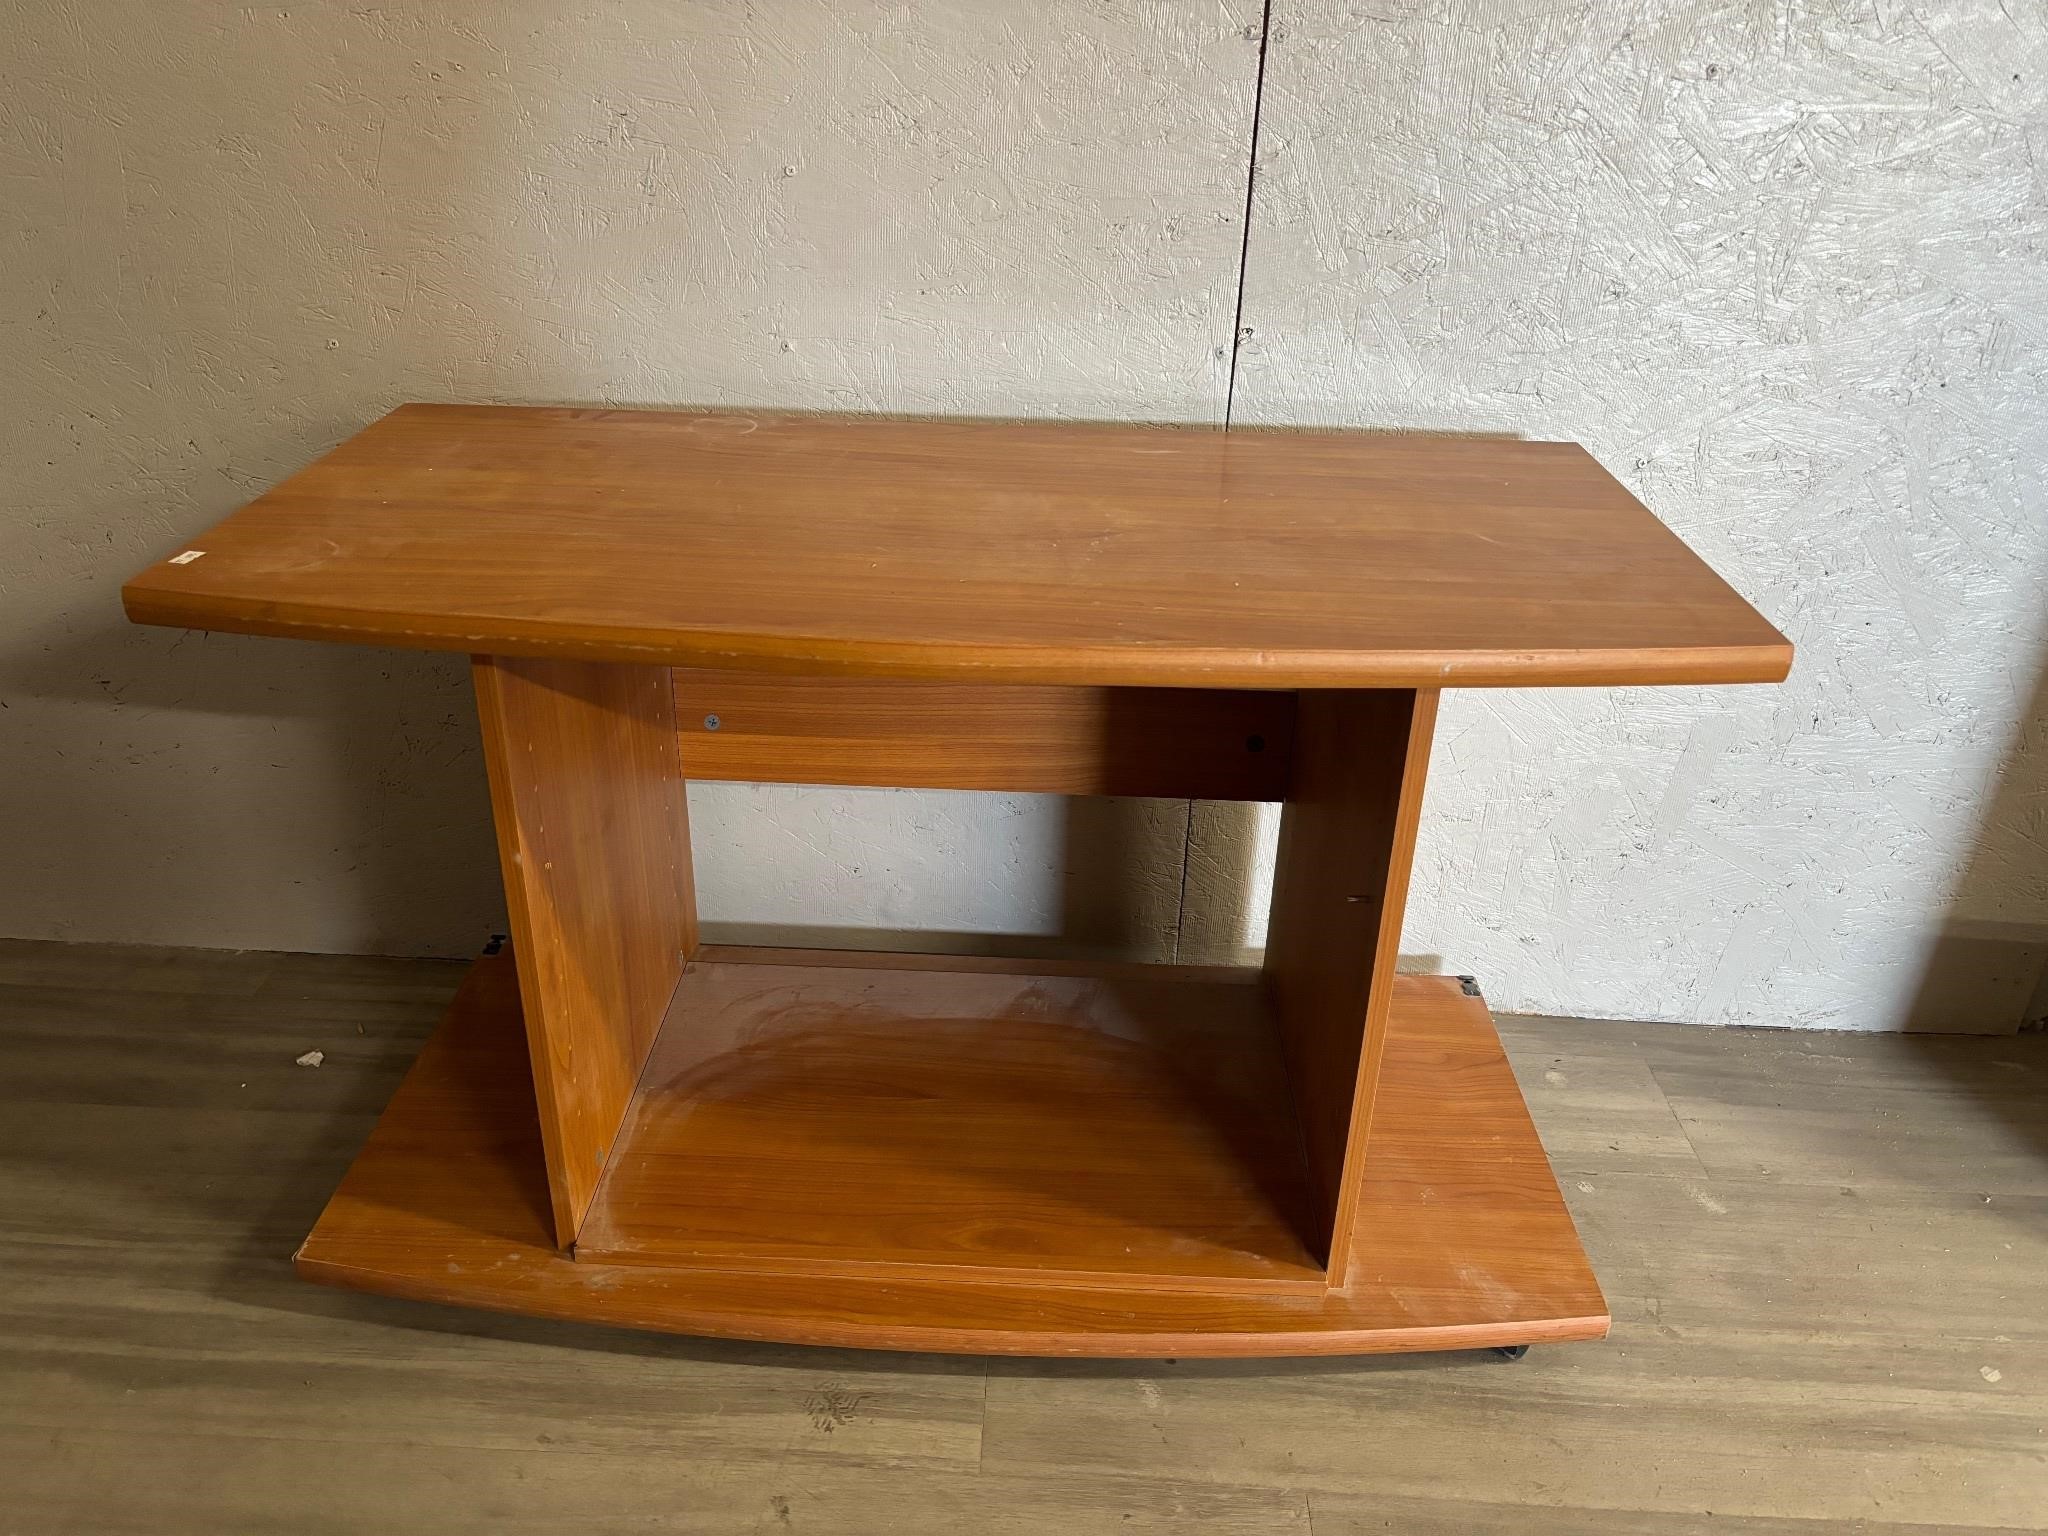 Tv Stand 40" x 19 1/2" x 24"